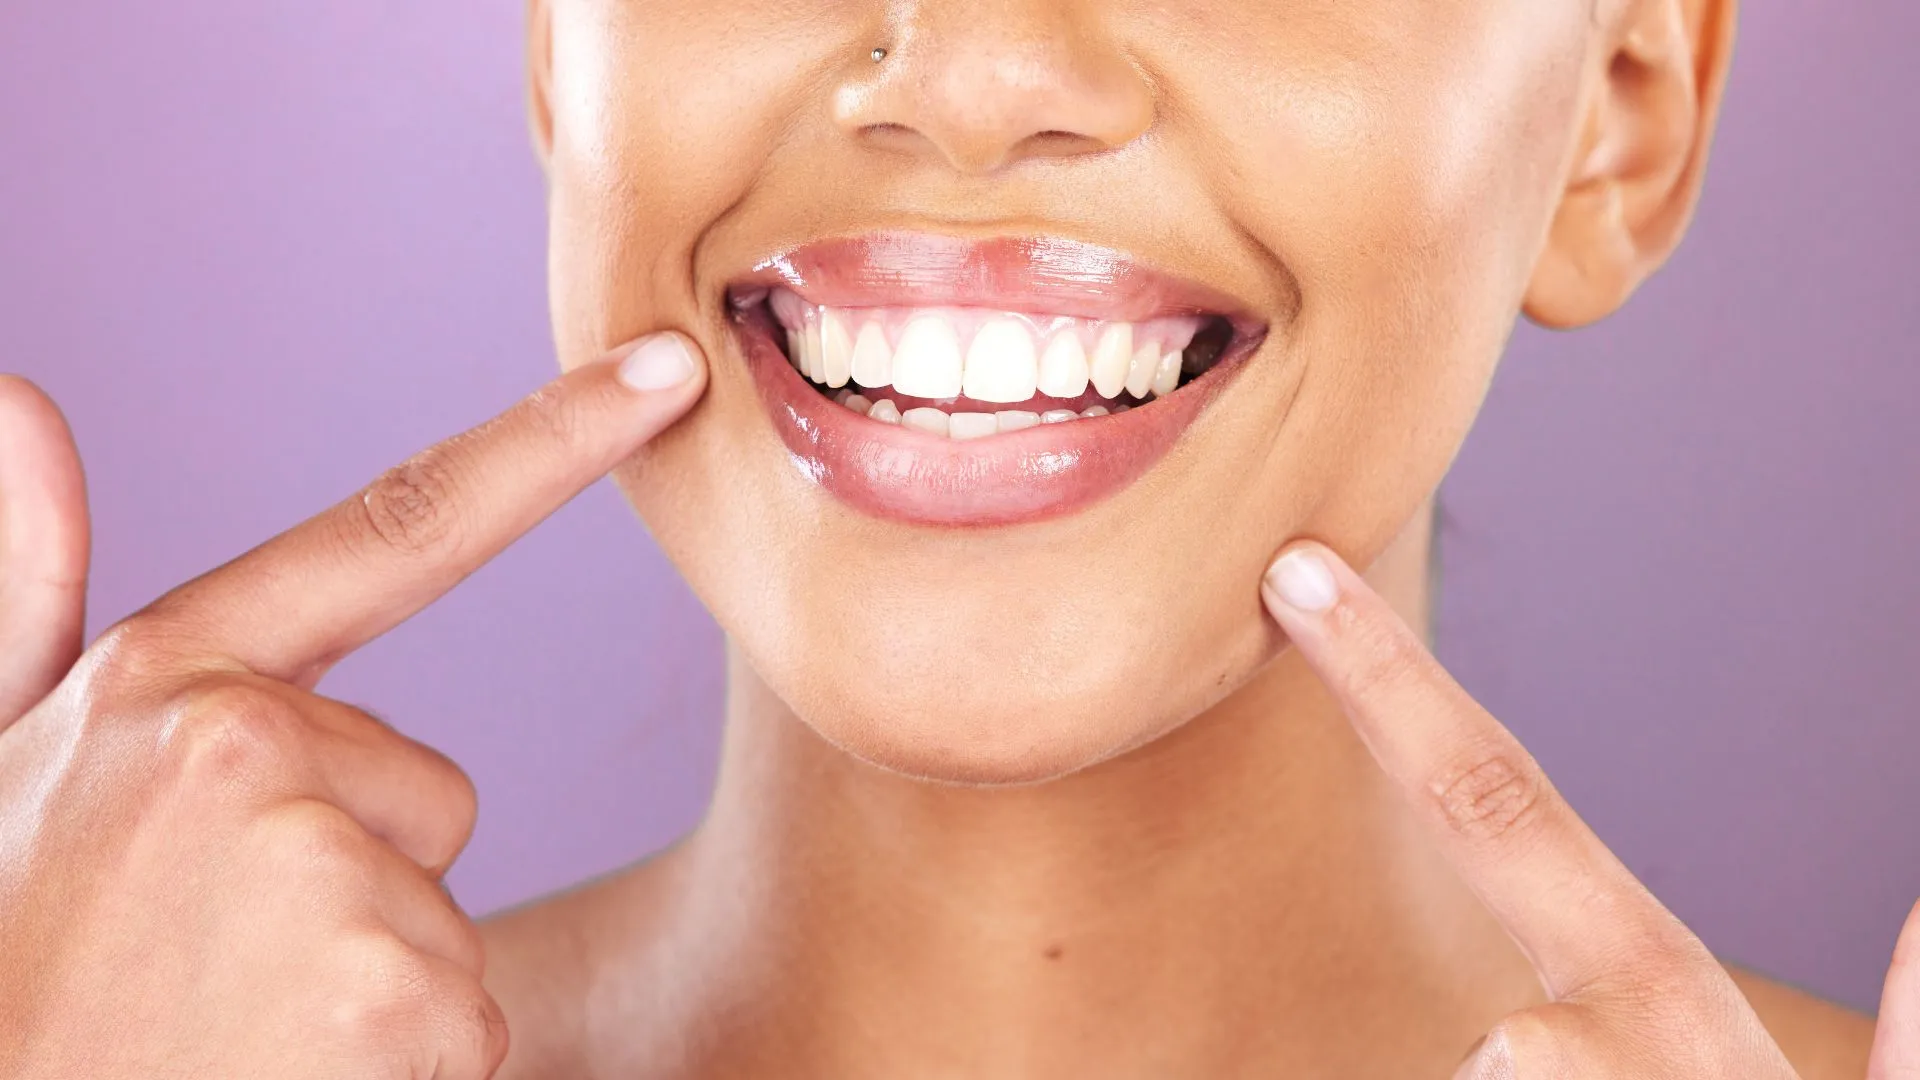 5 Reasons Dental Implants Are the Best Restorative Solution for Your Oral Health